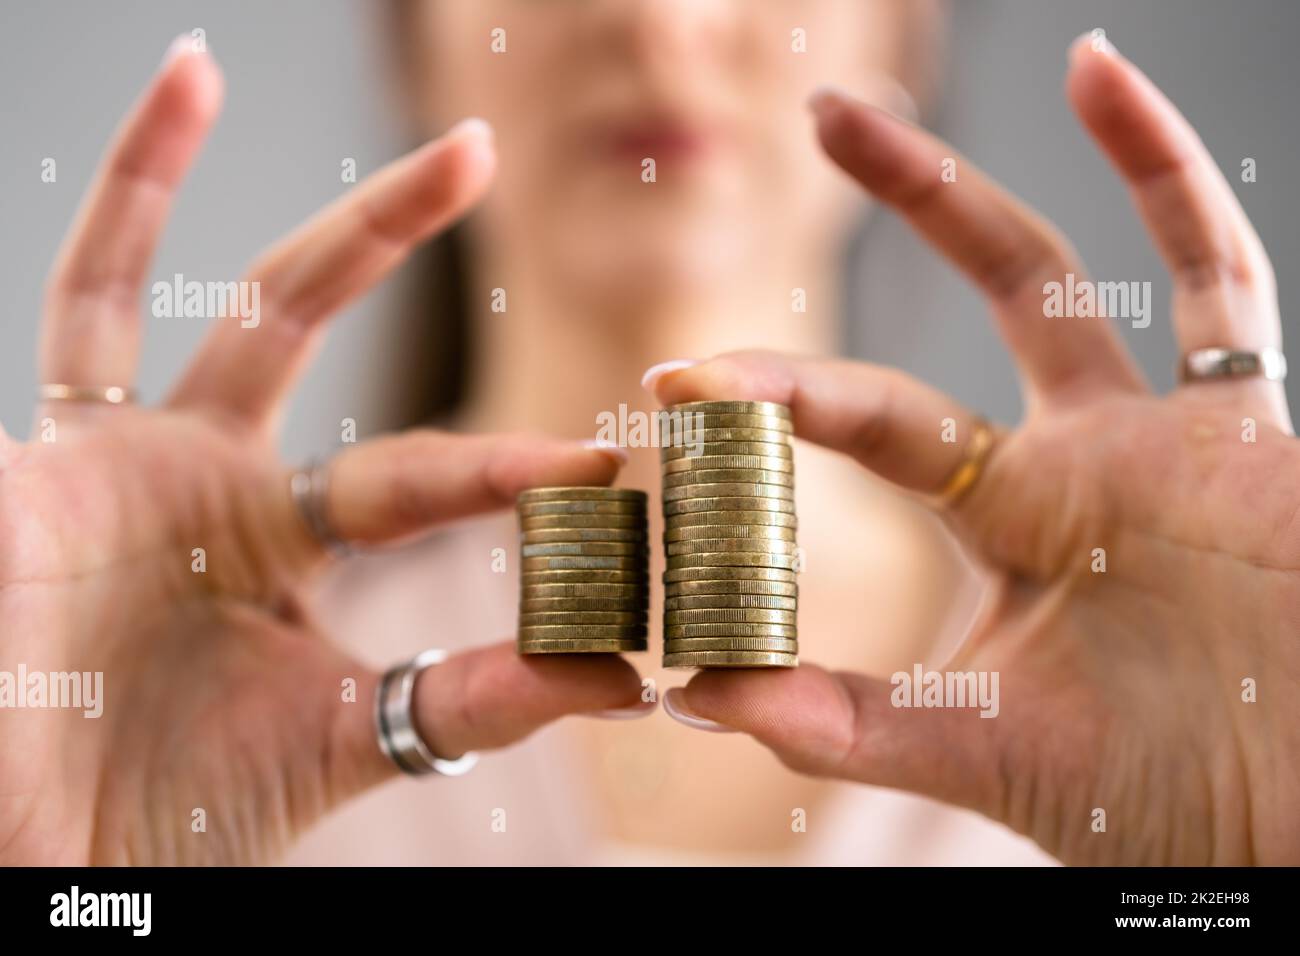 Compare Wage Gap And Tax Differences Stock Photo